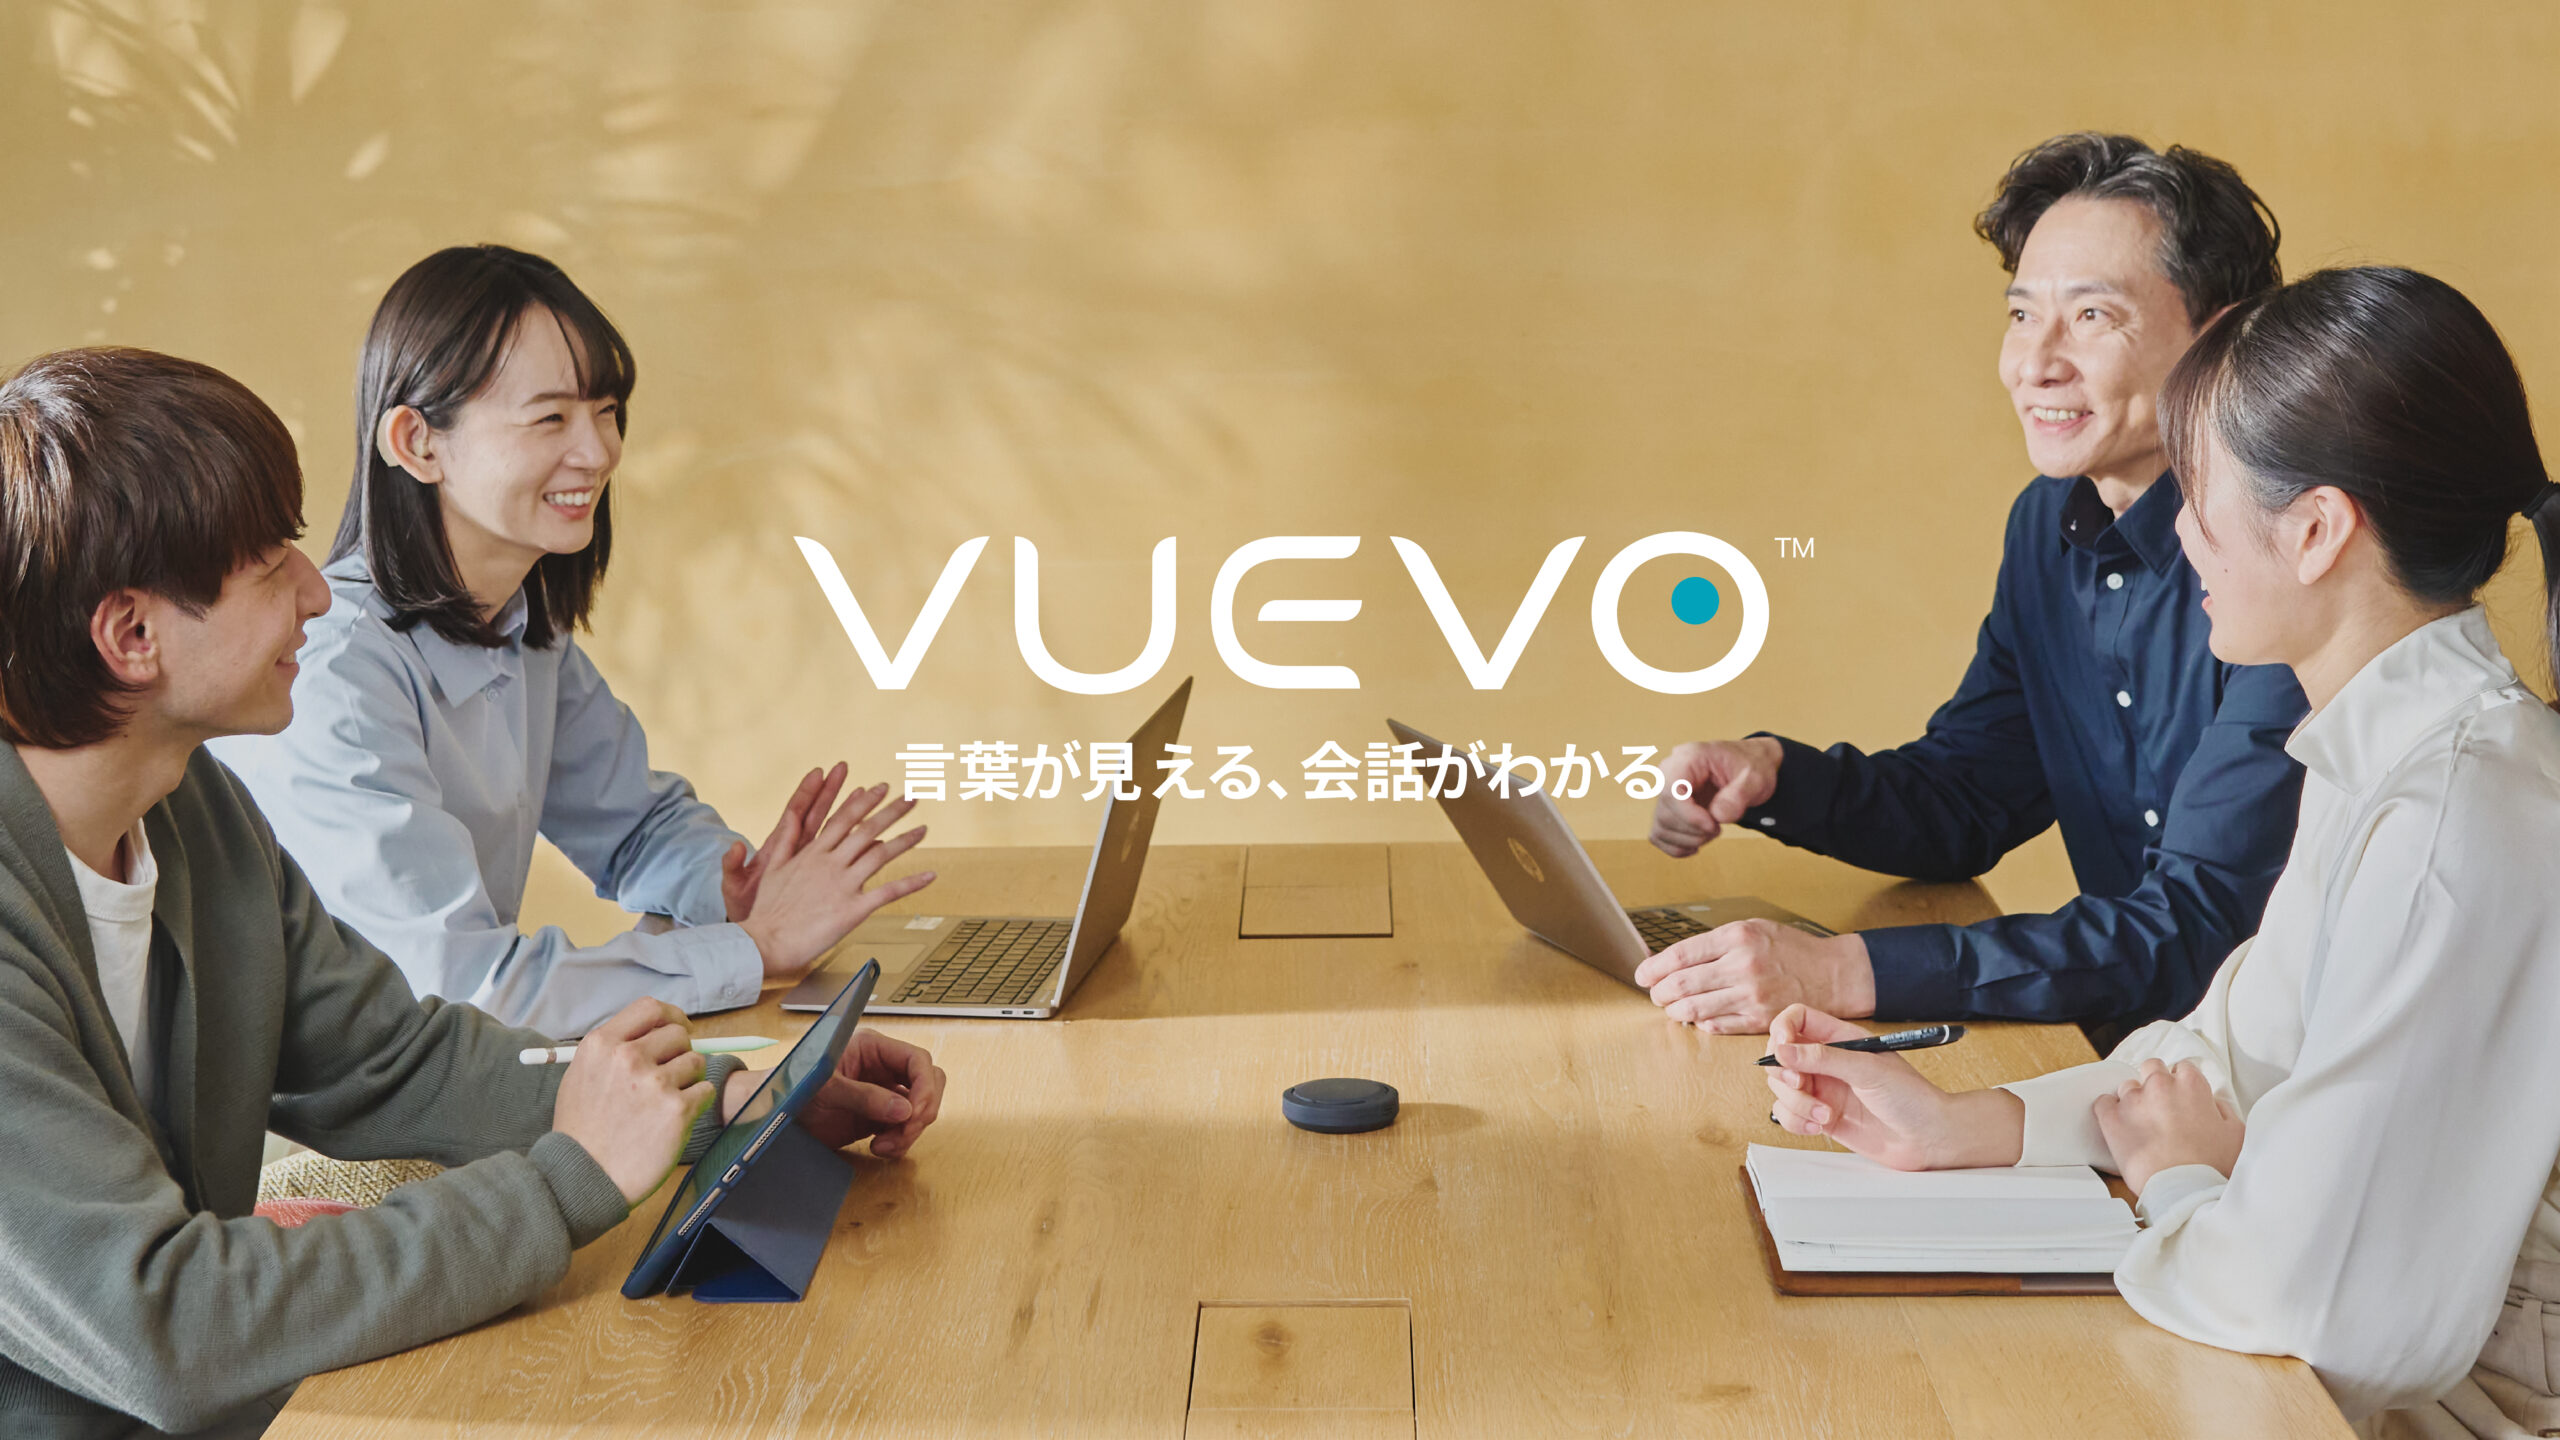 Pixie Dust Technologies begins sales of “VUEVO”, a service to support smooth communication between hearing impaired persons and/or persons with hearing difficulties and hearers<br>~ Real-time visualization of the conversation about “who” and “what” ~